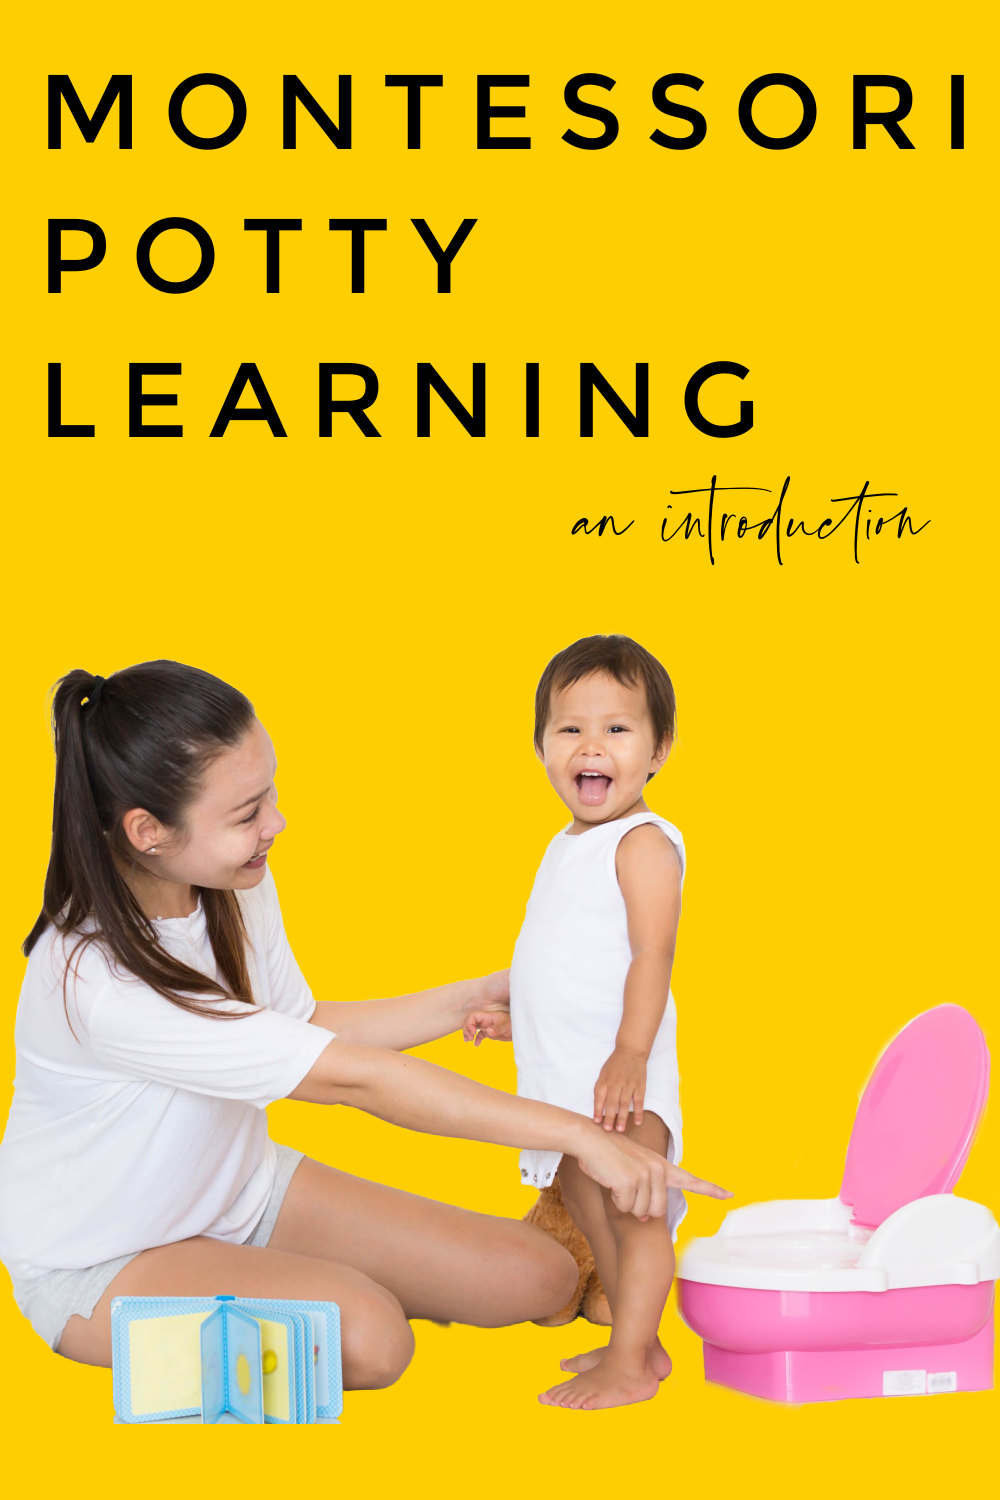 In this Montessori parenting podcast, we introduce the Montessori potty learning. This method is a child led journey which requires a shift for adults